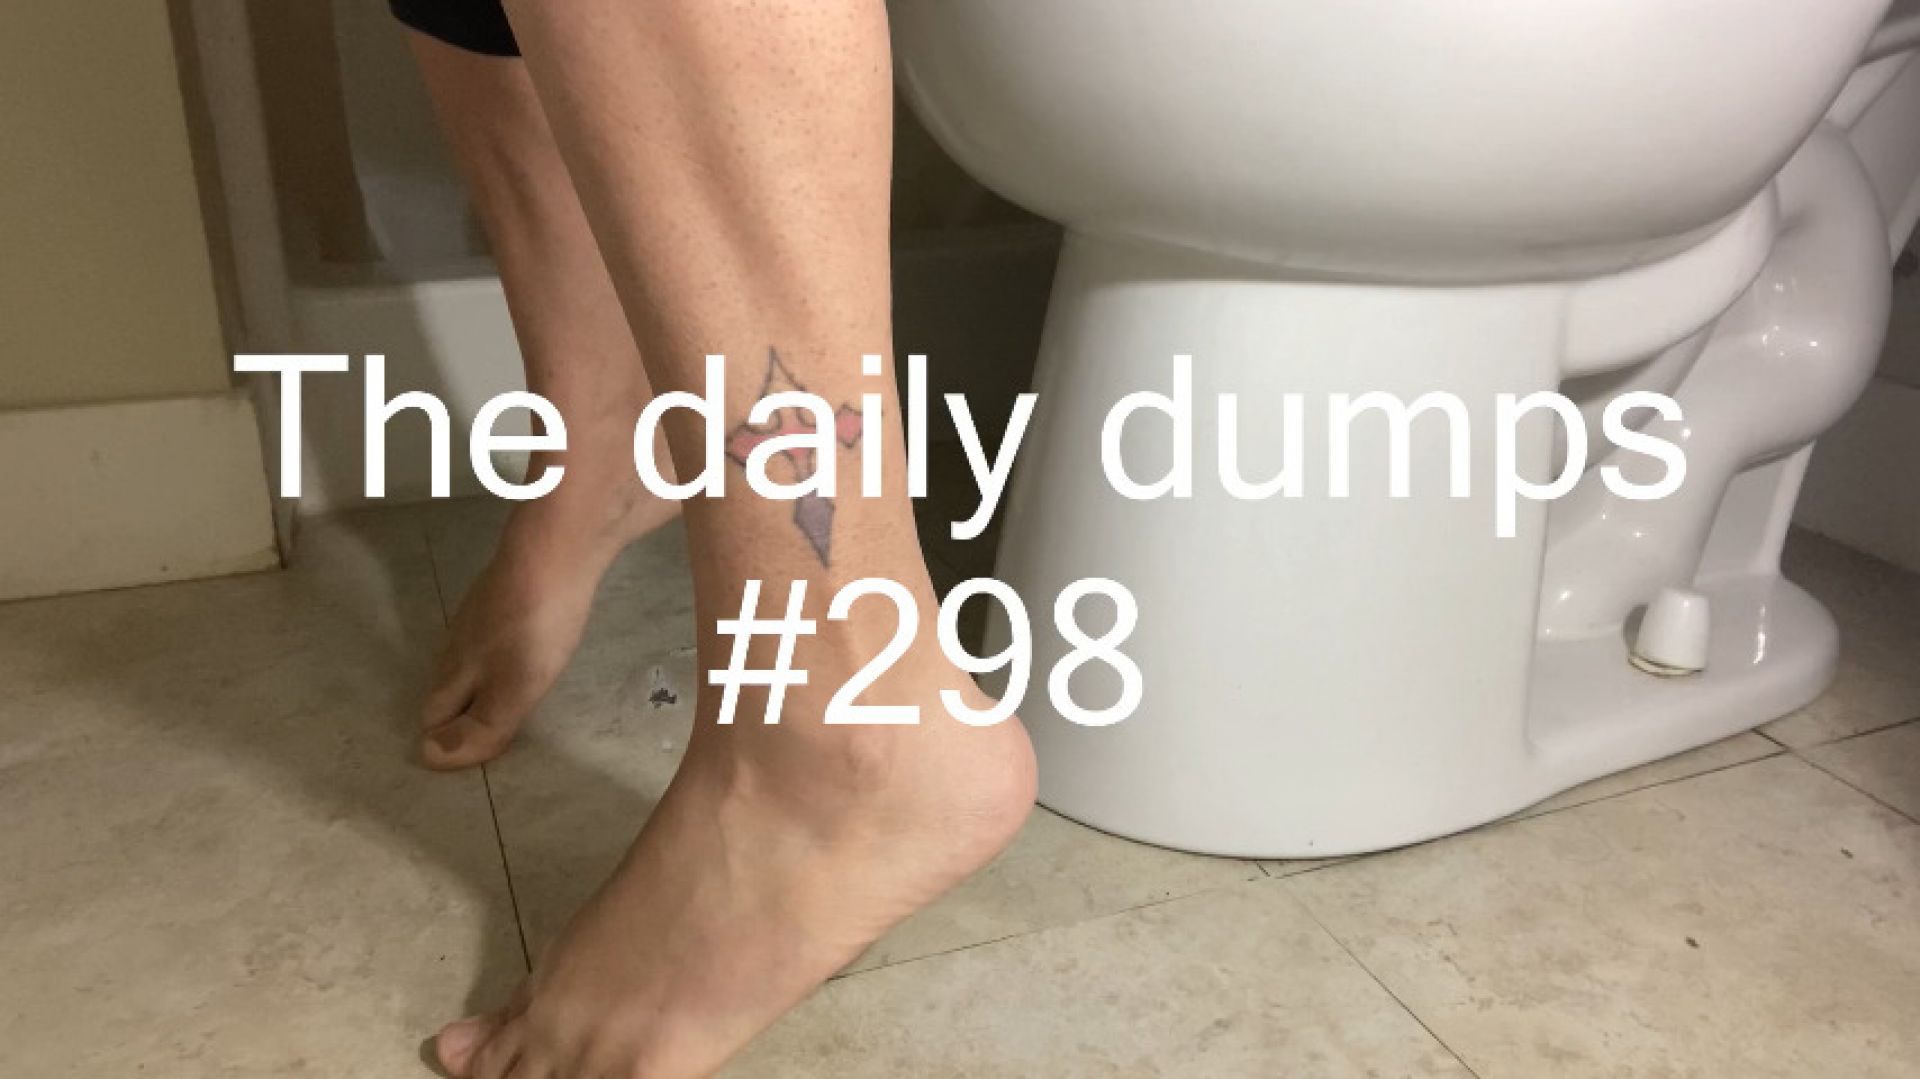 The daily dumps #298